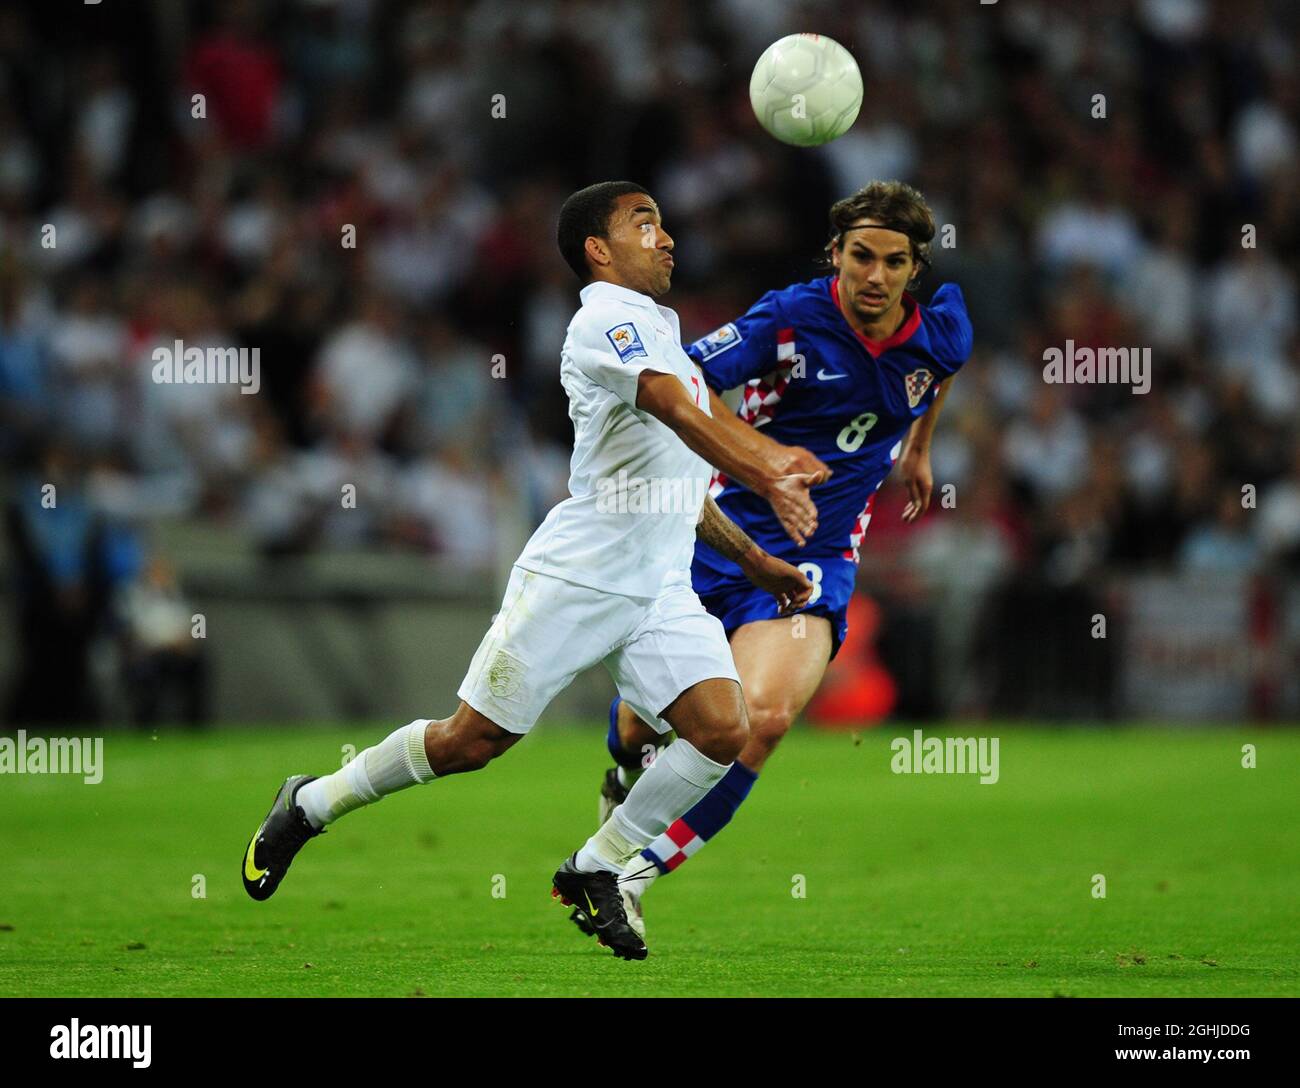 Aaron Lennon of England glides past Niko Kranjcar of Croatia during the World Cup European Qualifier match at Wembley Stadium, London. Stock Photo